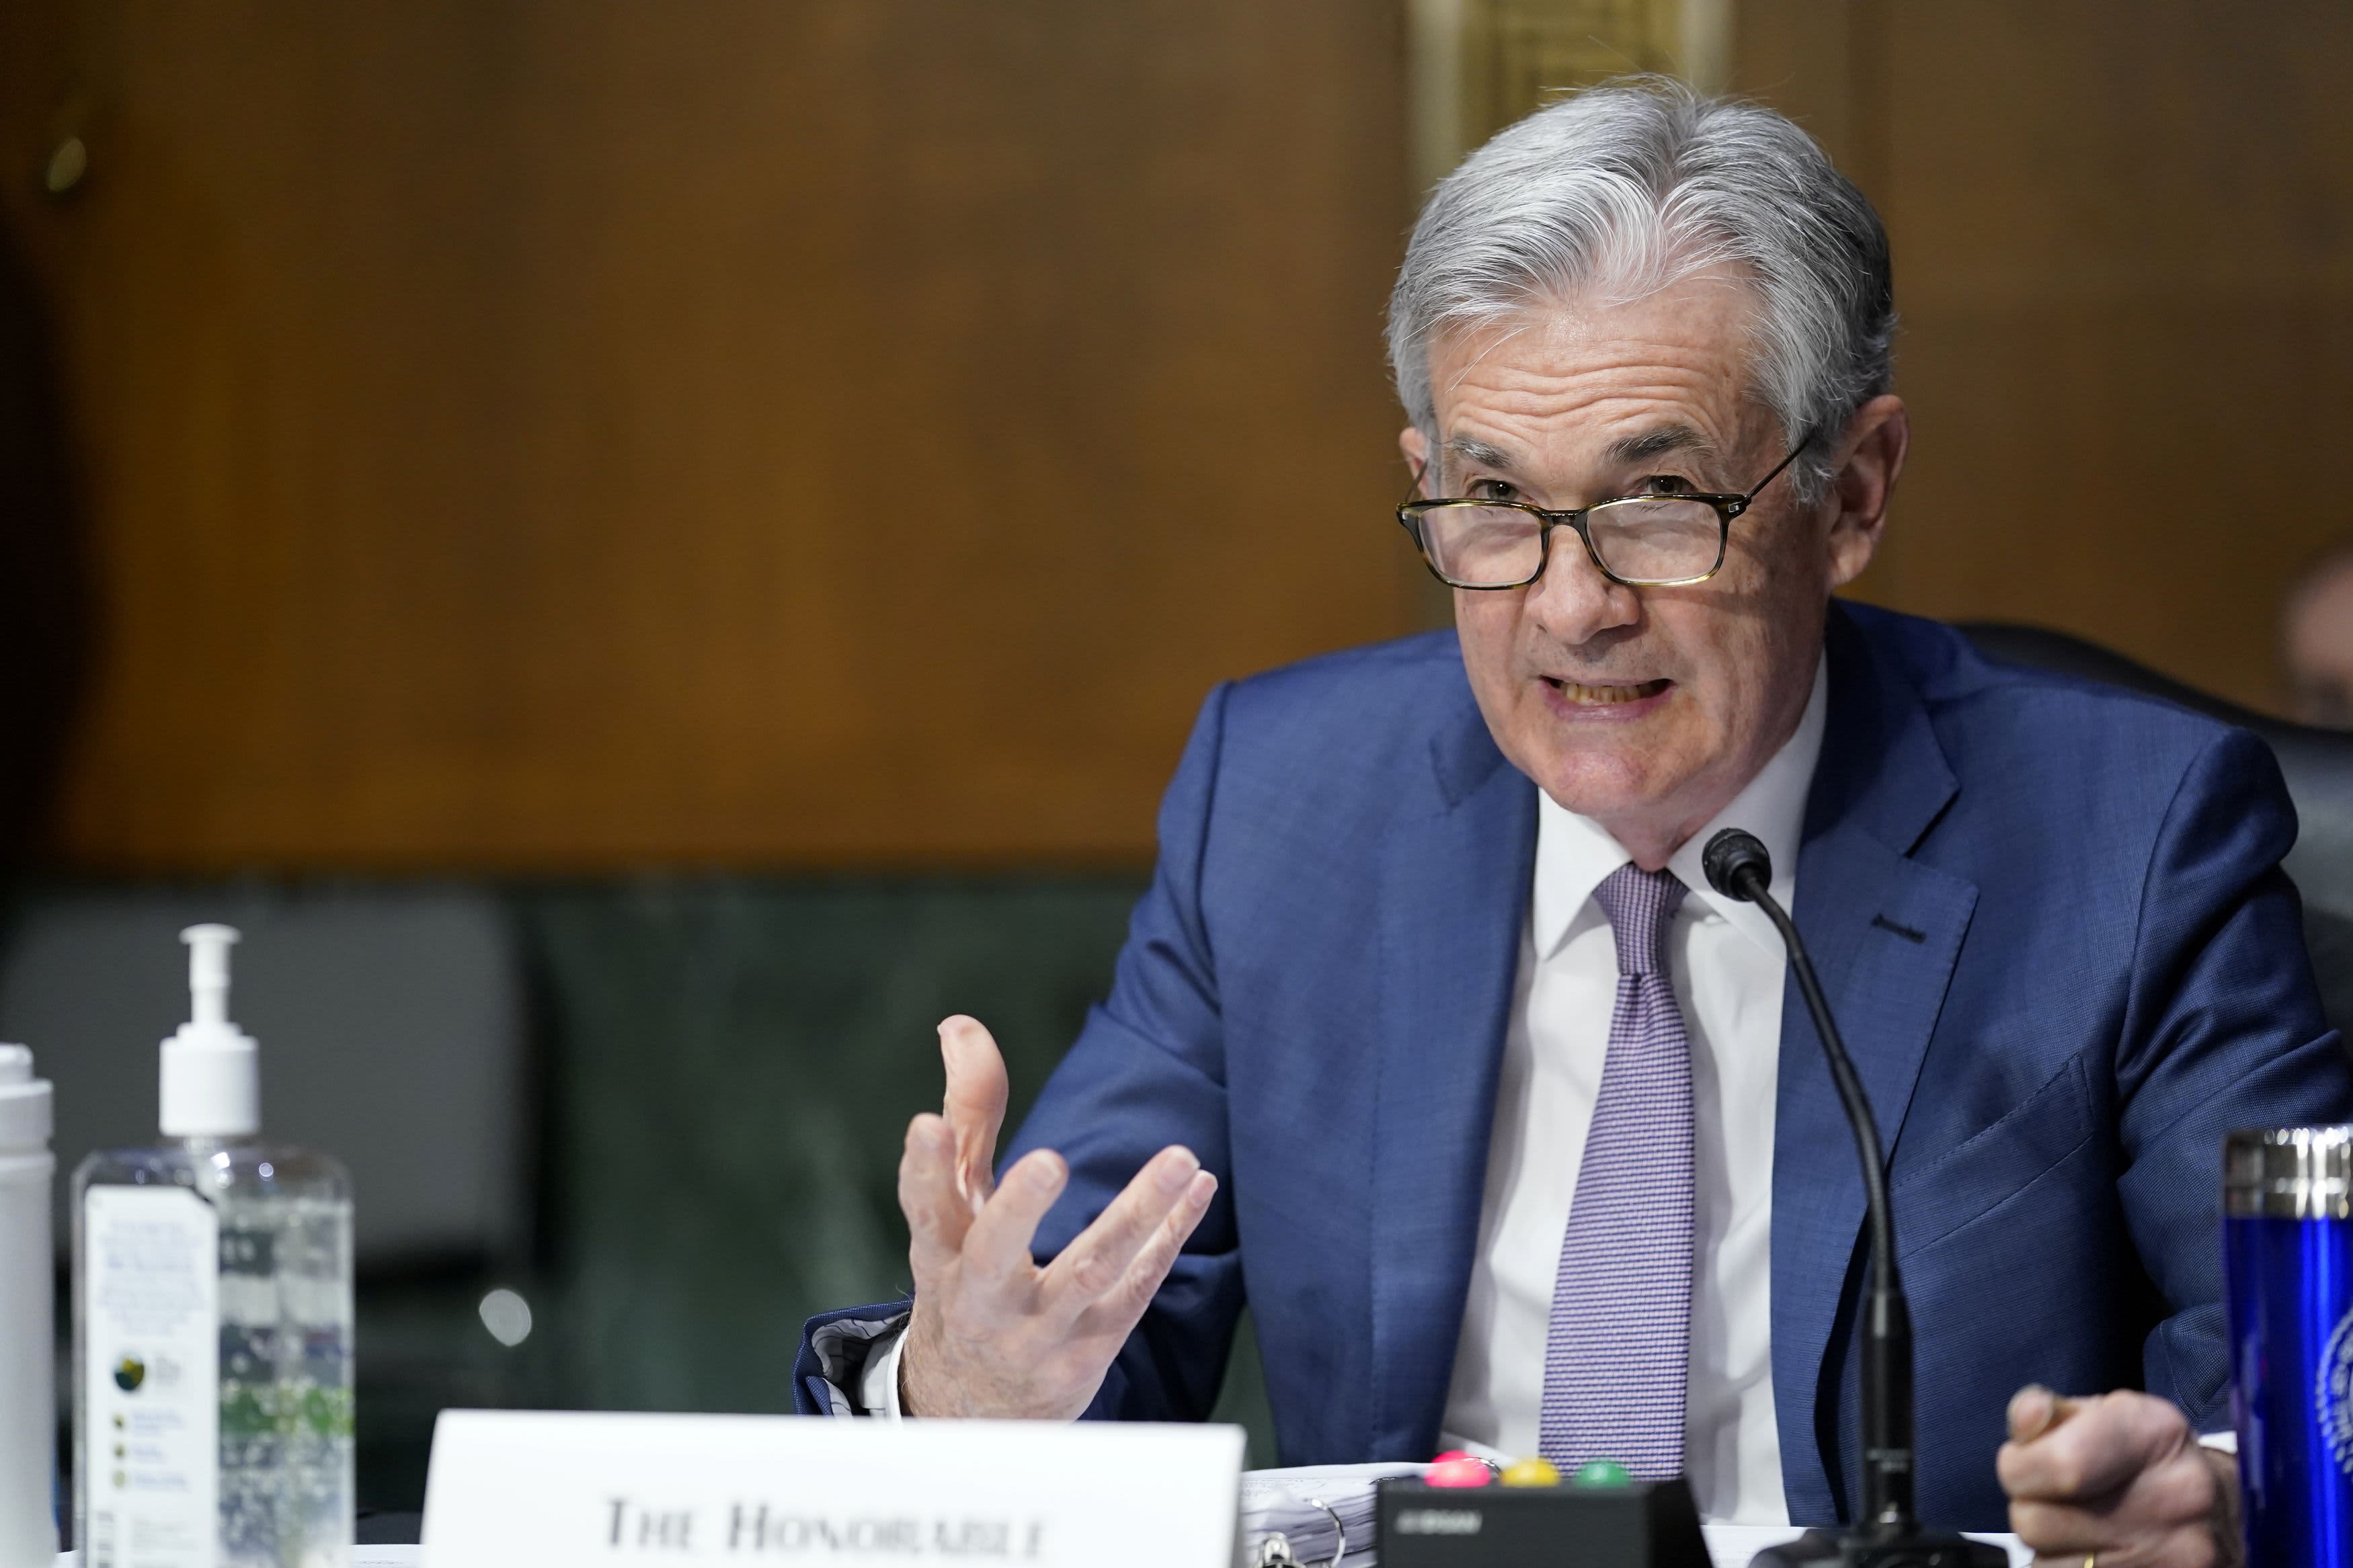 Watch Fed Chair Powell deliver his key Jackson Hole economic speech live